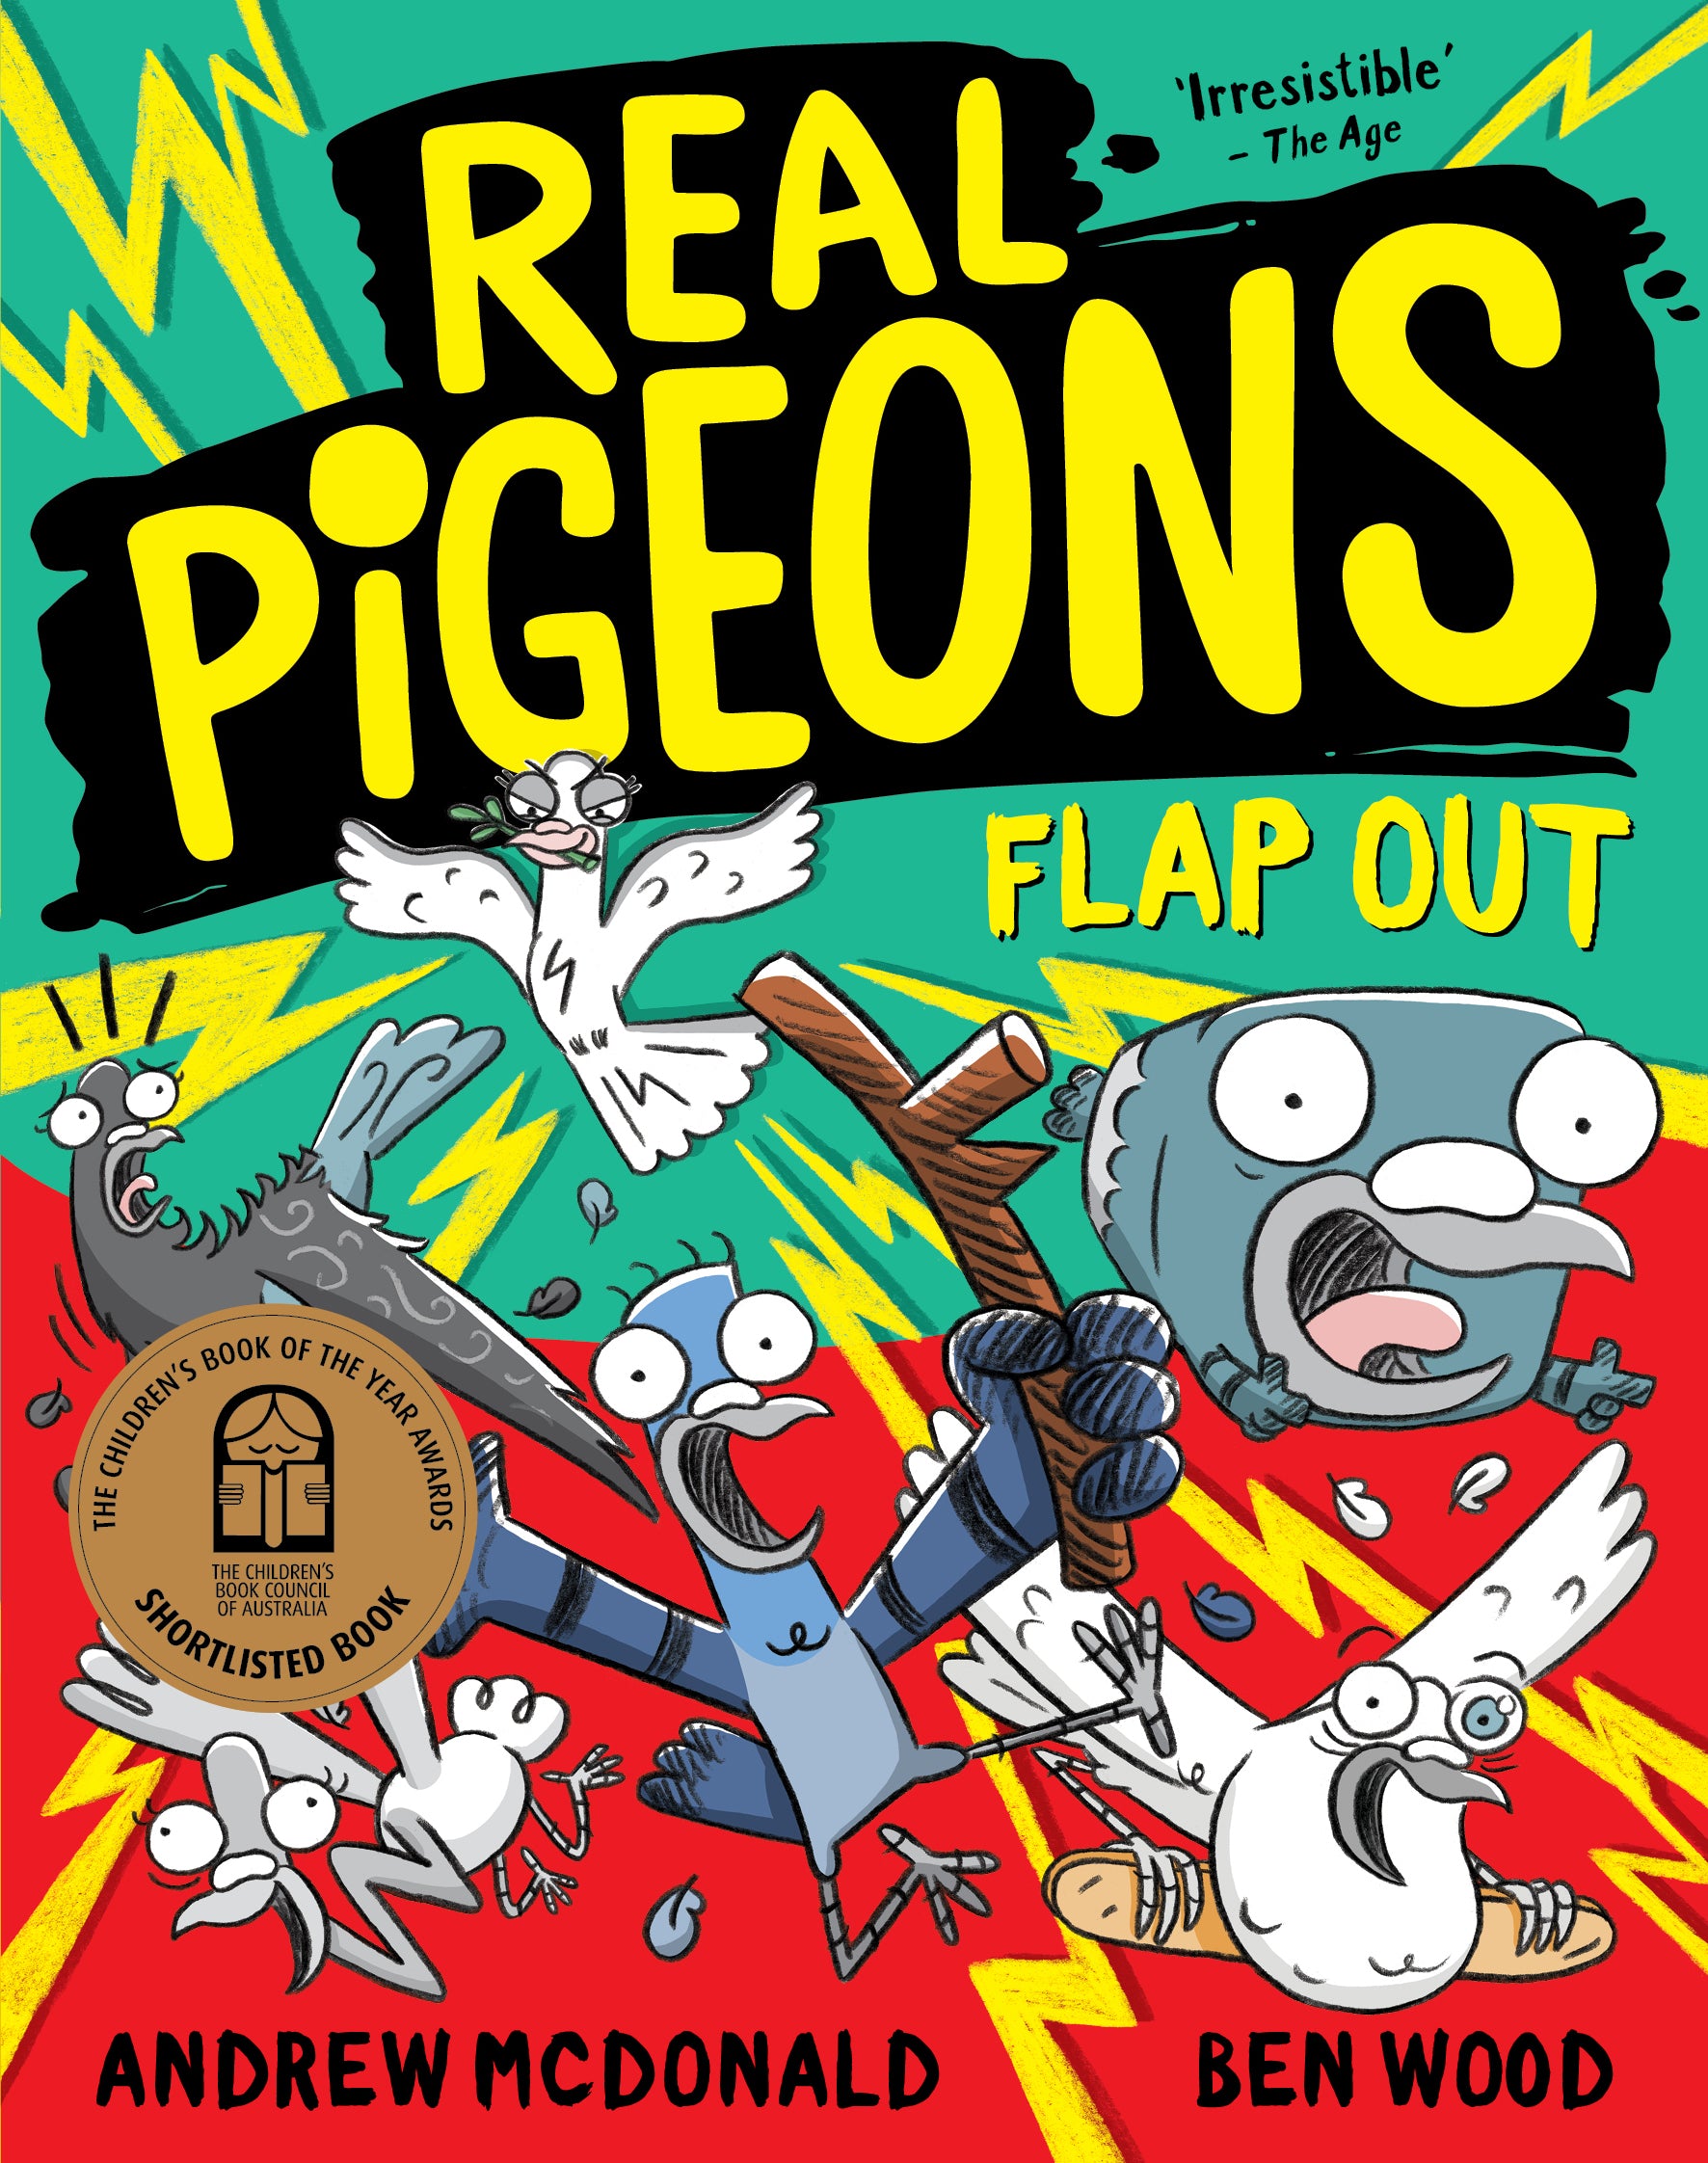 Real Pigeons Flap Out by Andrew McDonald and Ben Woods